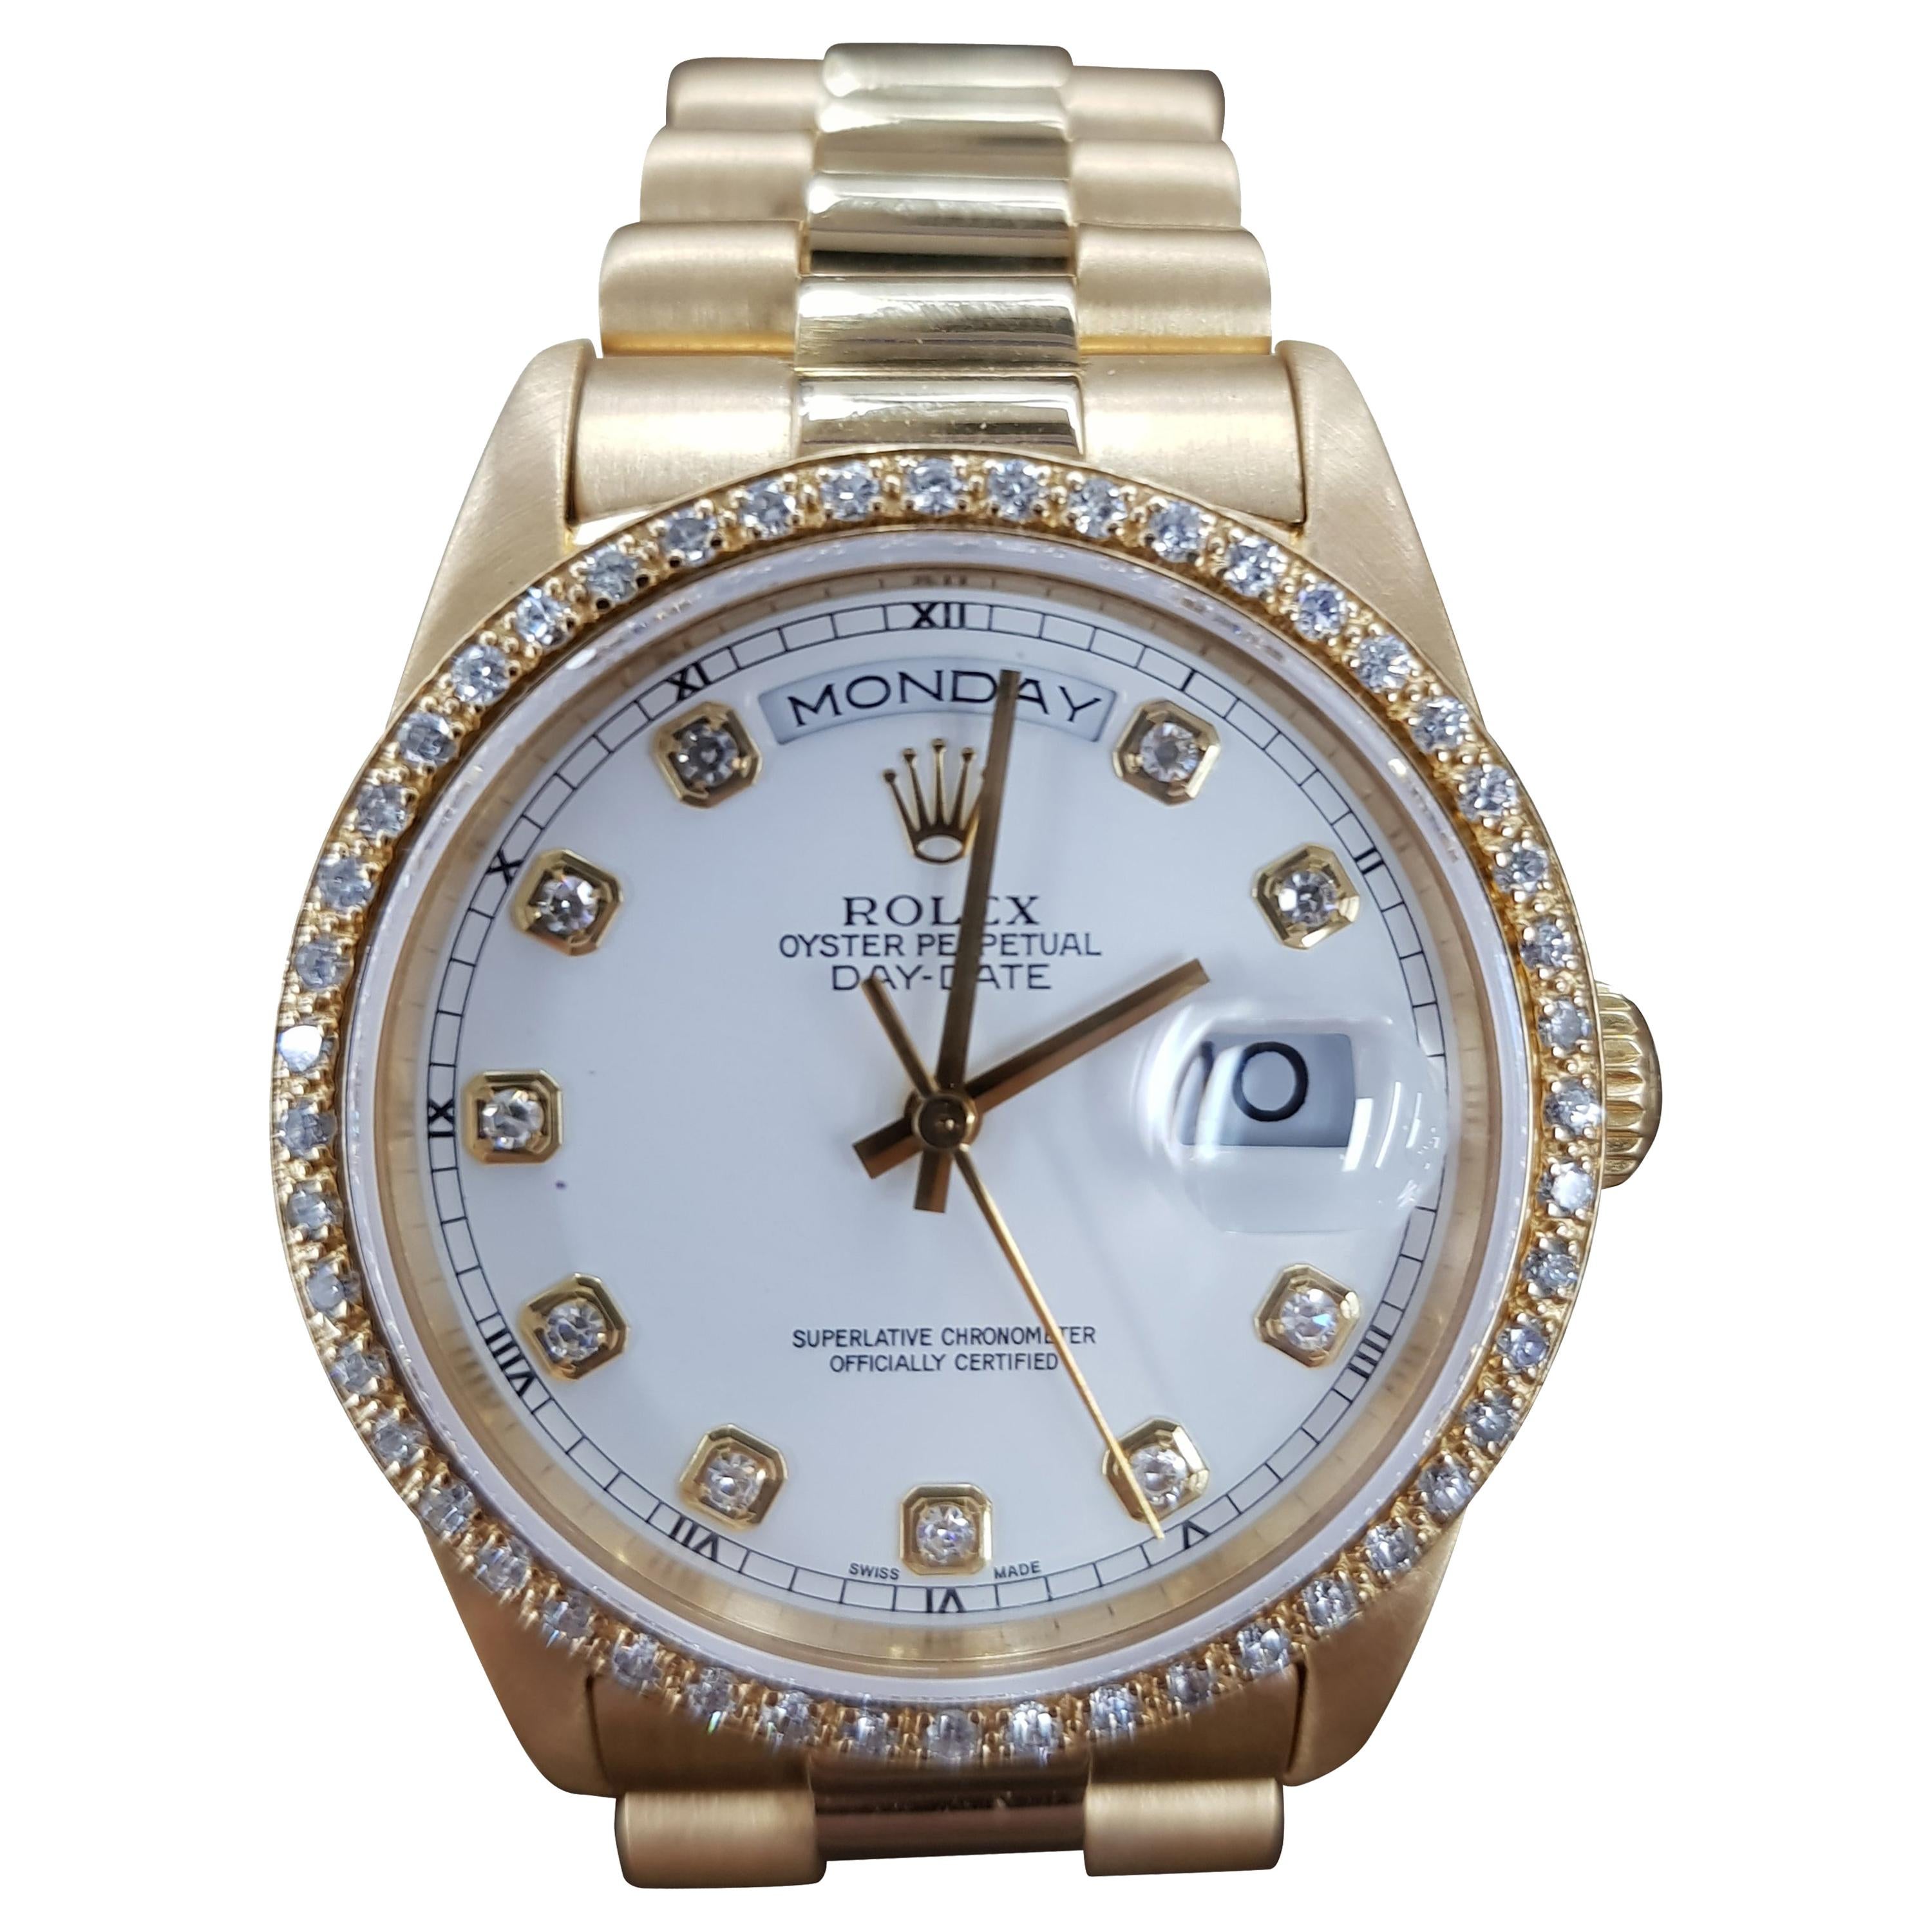 Rolex Day Date, Yellow Gold, Model Number 18238, Registered 1993 For Sale